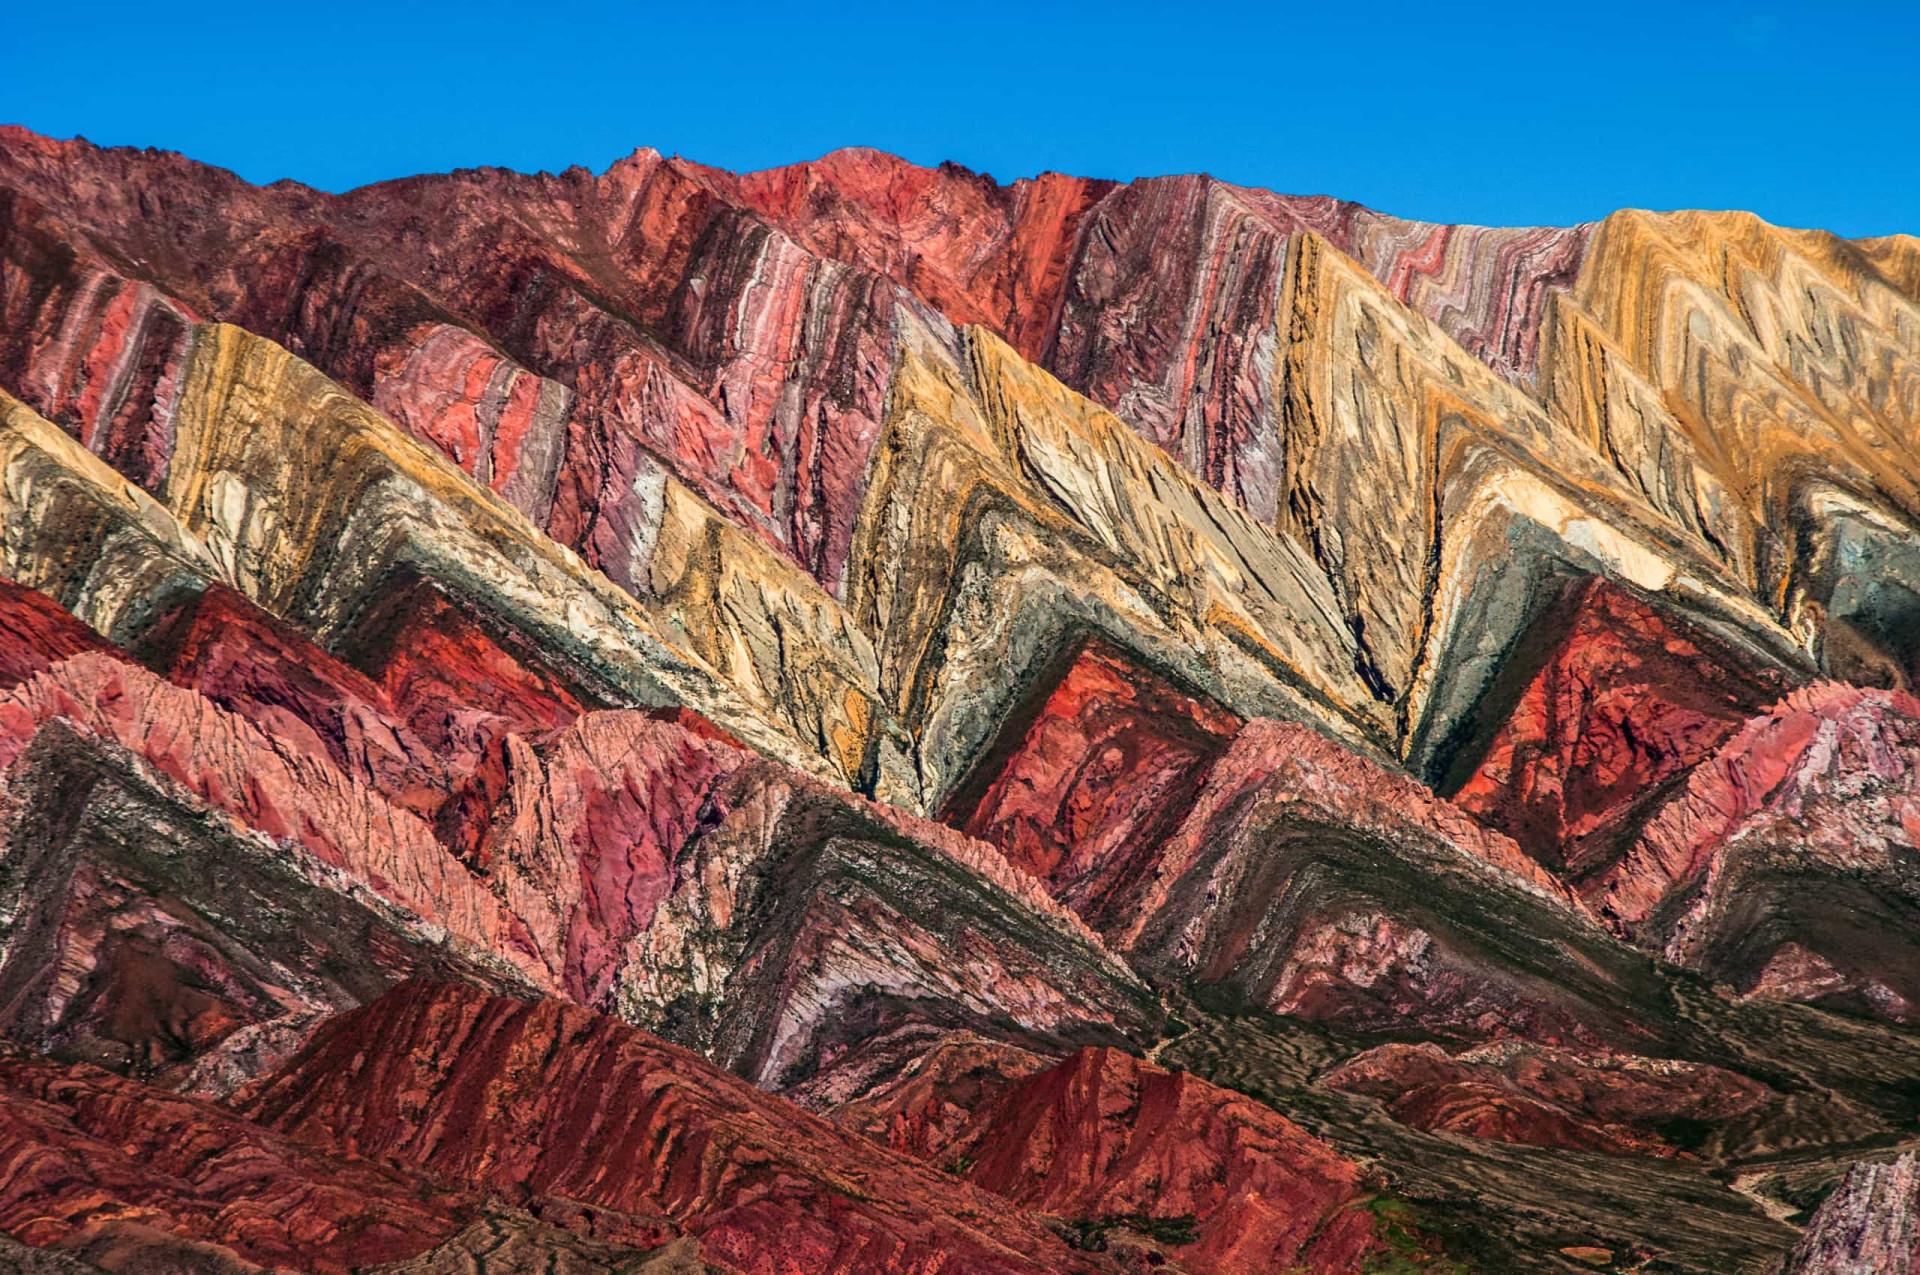 Location: Jujuy Province<br>Criteria: Cultural<br>Year established: 2003<br>Description: The site, a narrow mountain valley, was a caravan road for the Inca Empire in the 15th century. A pre-Inca fortification, Pucará de Tilcara, and the colorful Serranía de Hornocal mountain range (pictured) fall within its boundaries.<p><a href="https://www.msn.com/en-us/community/channel/vid-7xx8mnucu55yw63we9va2gwr7uihbxwc68fxqp25x6tg4ftibpra?cvid=94631541bc0f4f89bfd59158d696ad7e">Follow us and access great exclusive content every day</a></p>